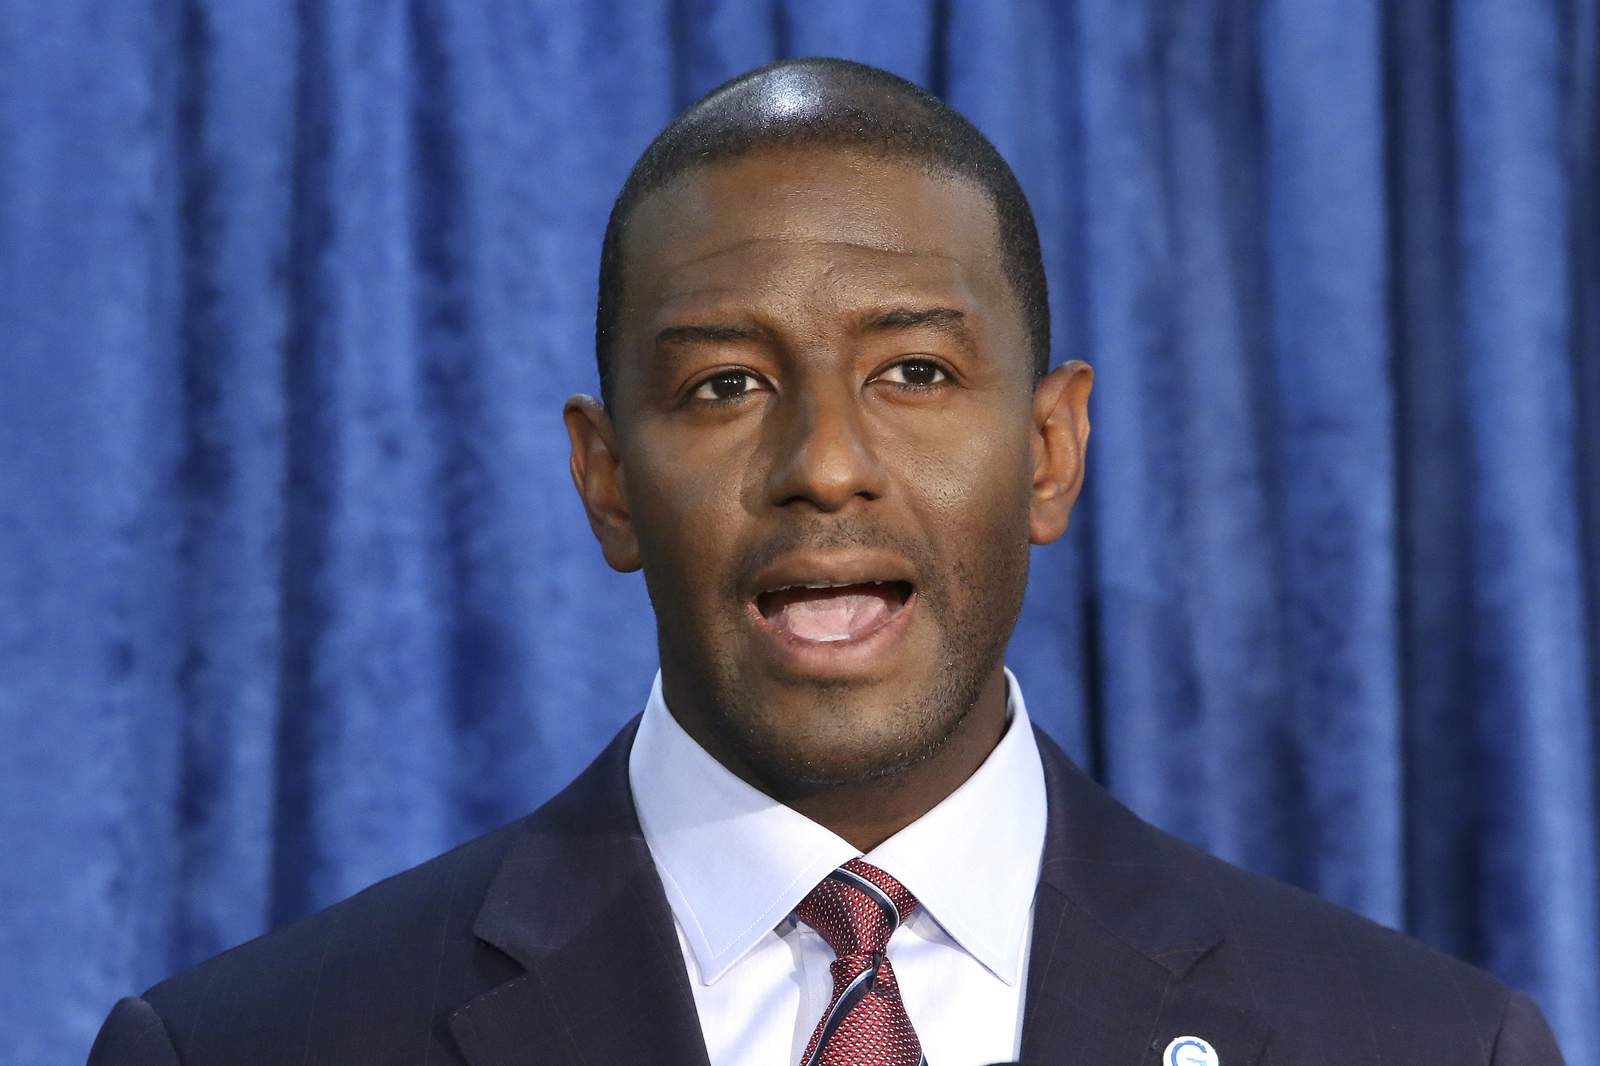 Politicians react after Andrew Gillum announces he’s bisexual